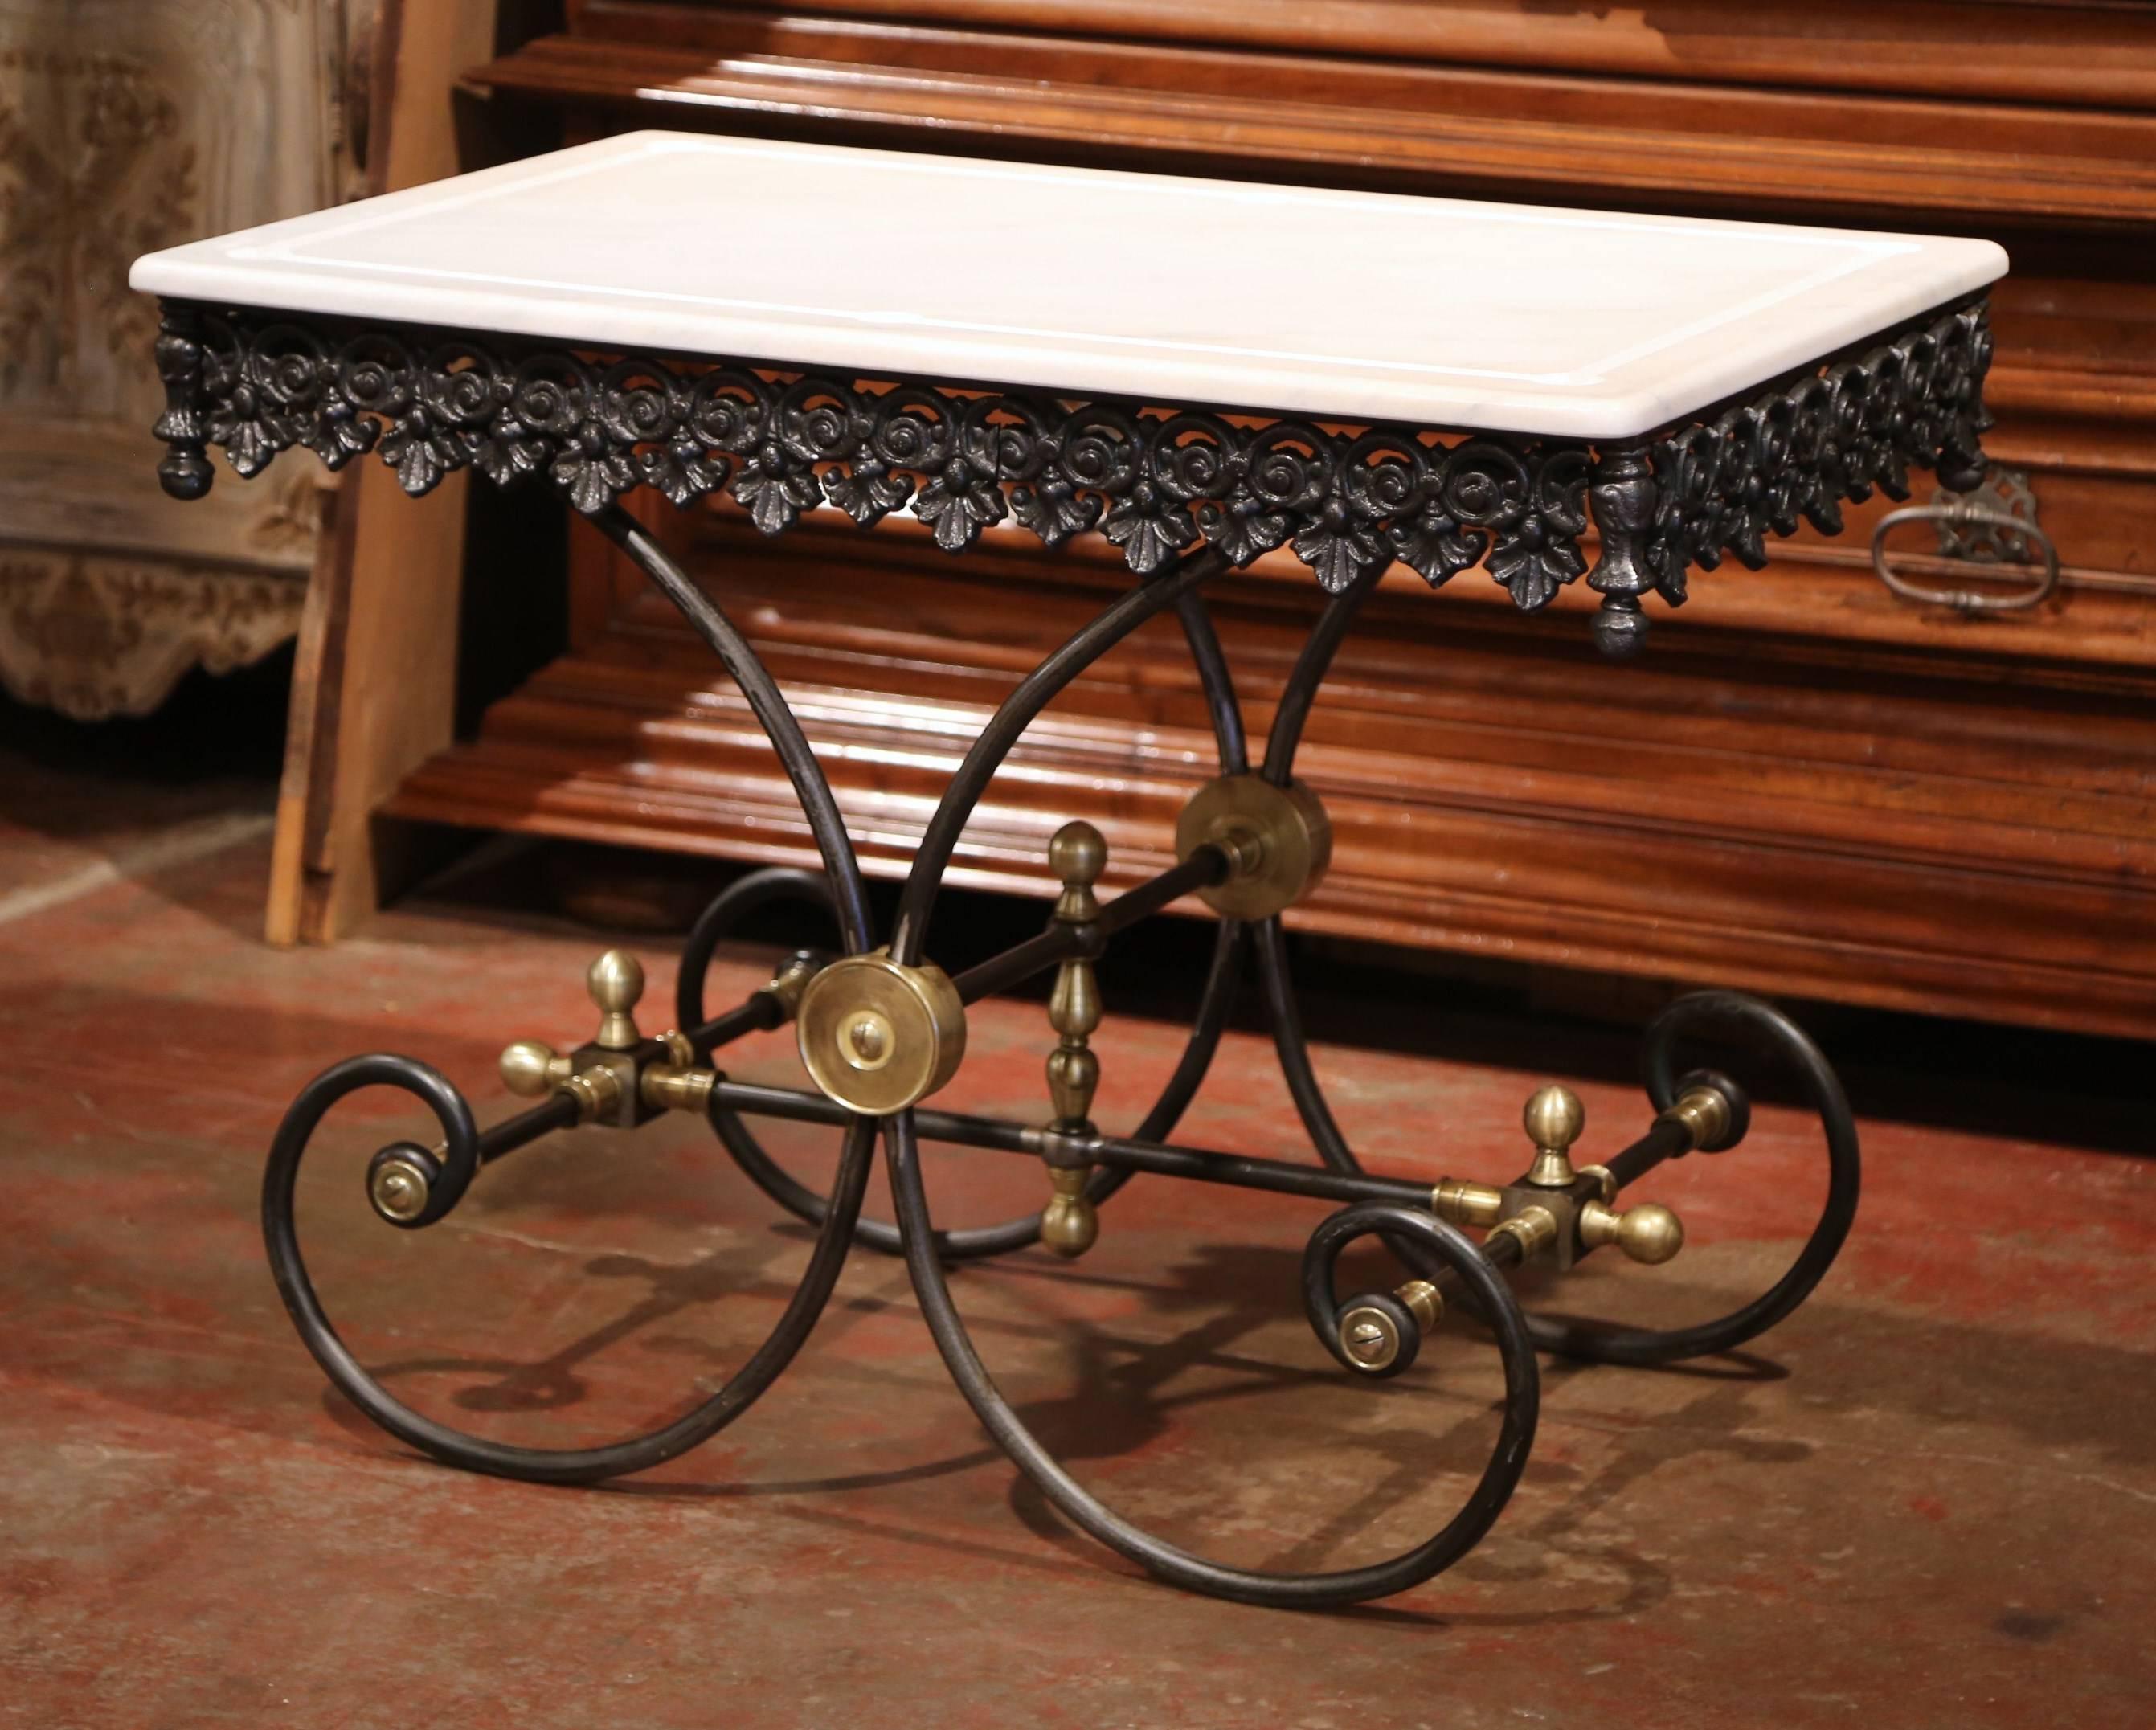 Contemporary Polished French Iron Butcher or Pastry Table with Marble Top and Brass Mounts